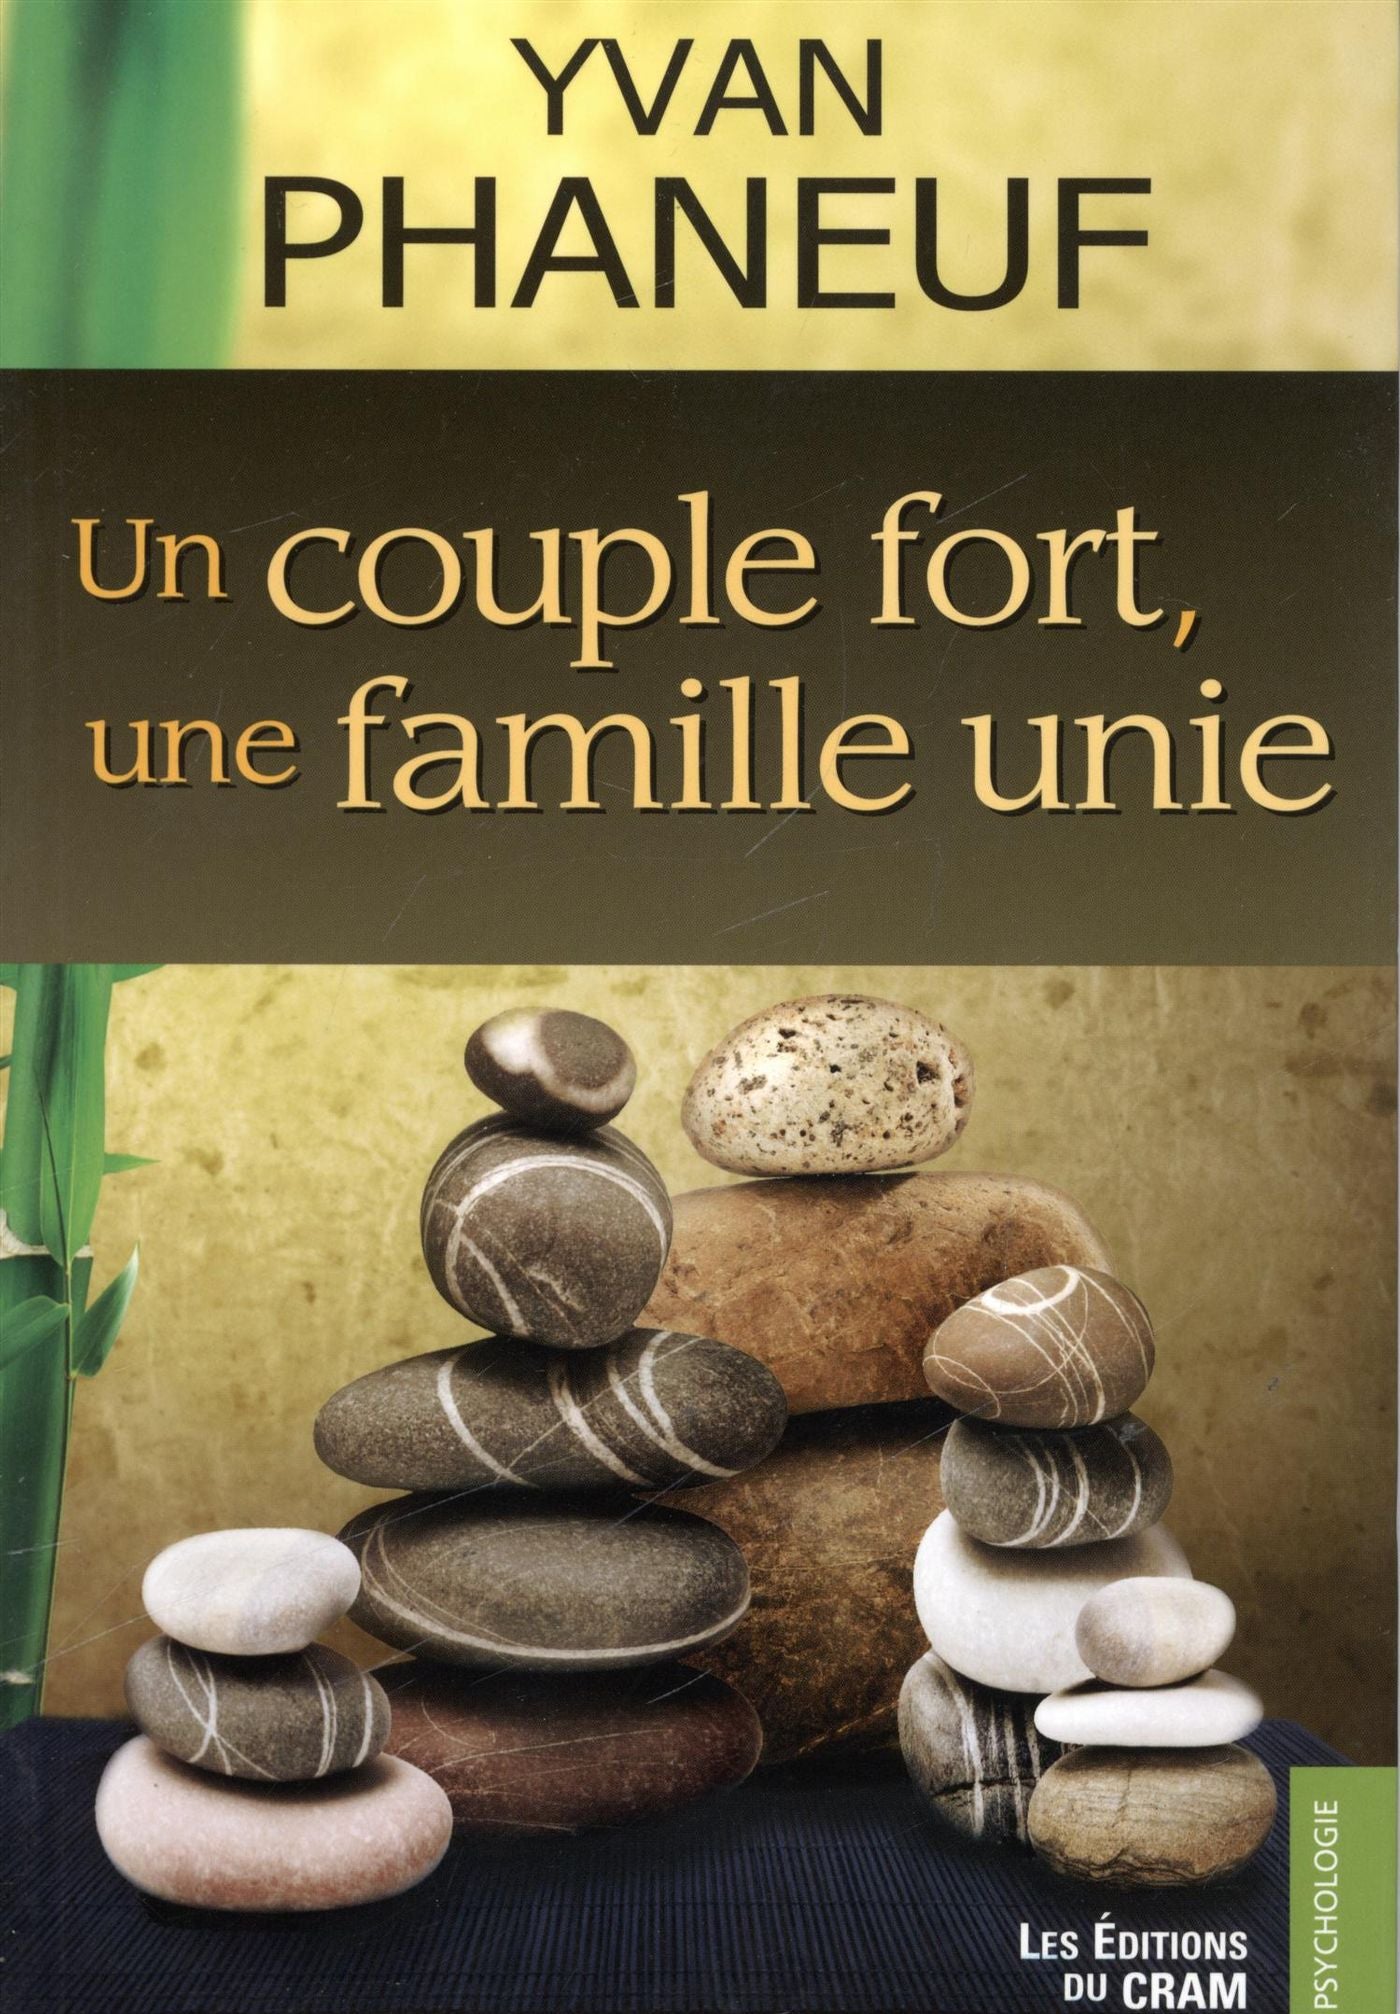 Un couple fort, une famille unie - Yvan Phaneuf